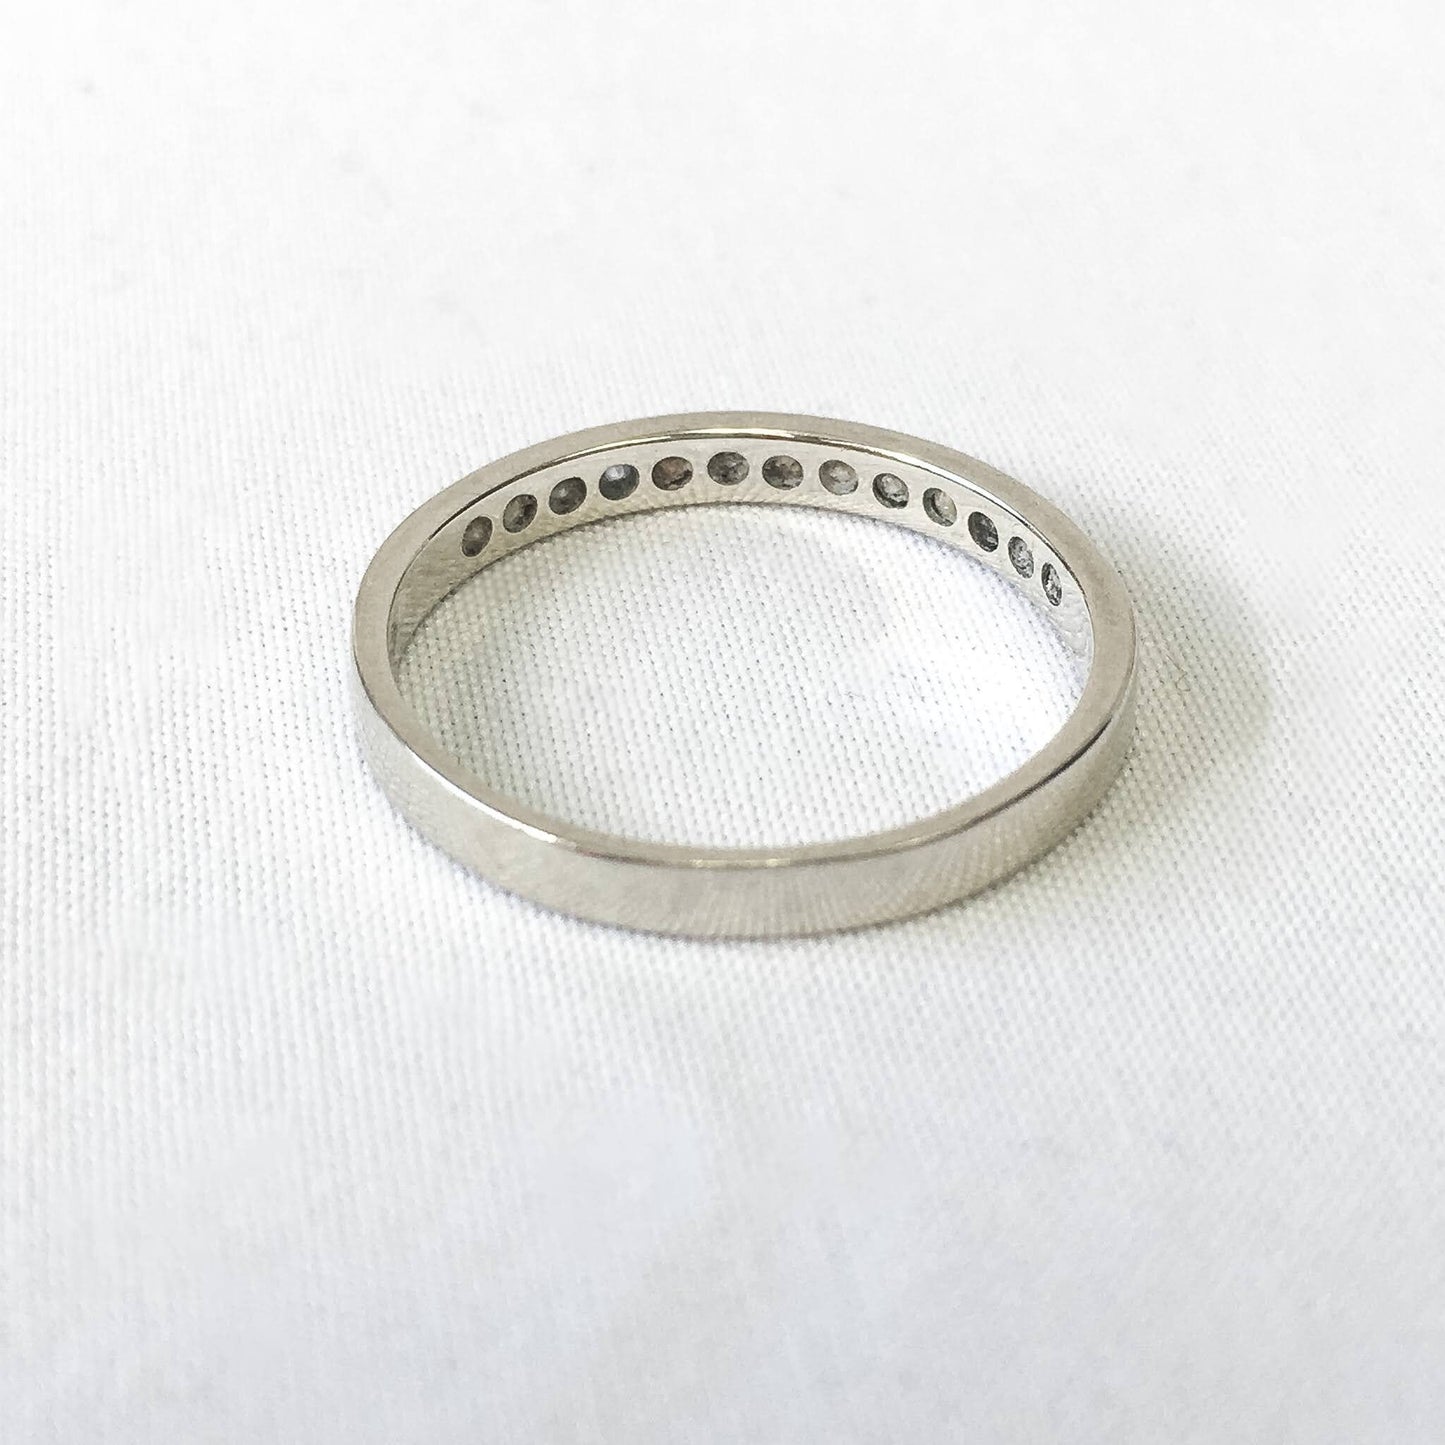 Vintage 14k White Gold and Diamond Channel Wedding Band, Classic Vintage Gold, Size 7.75